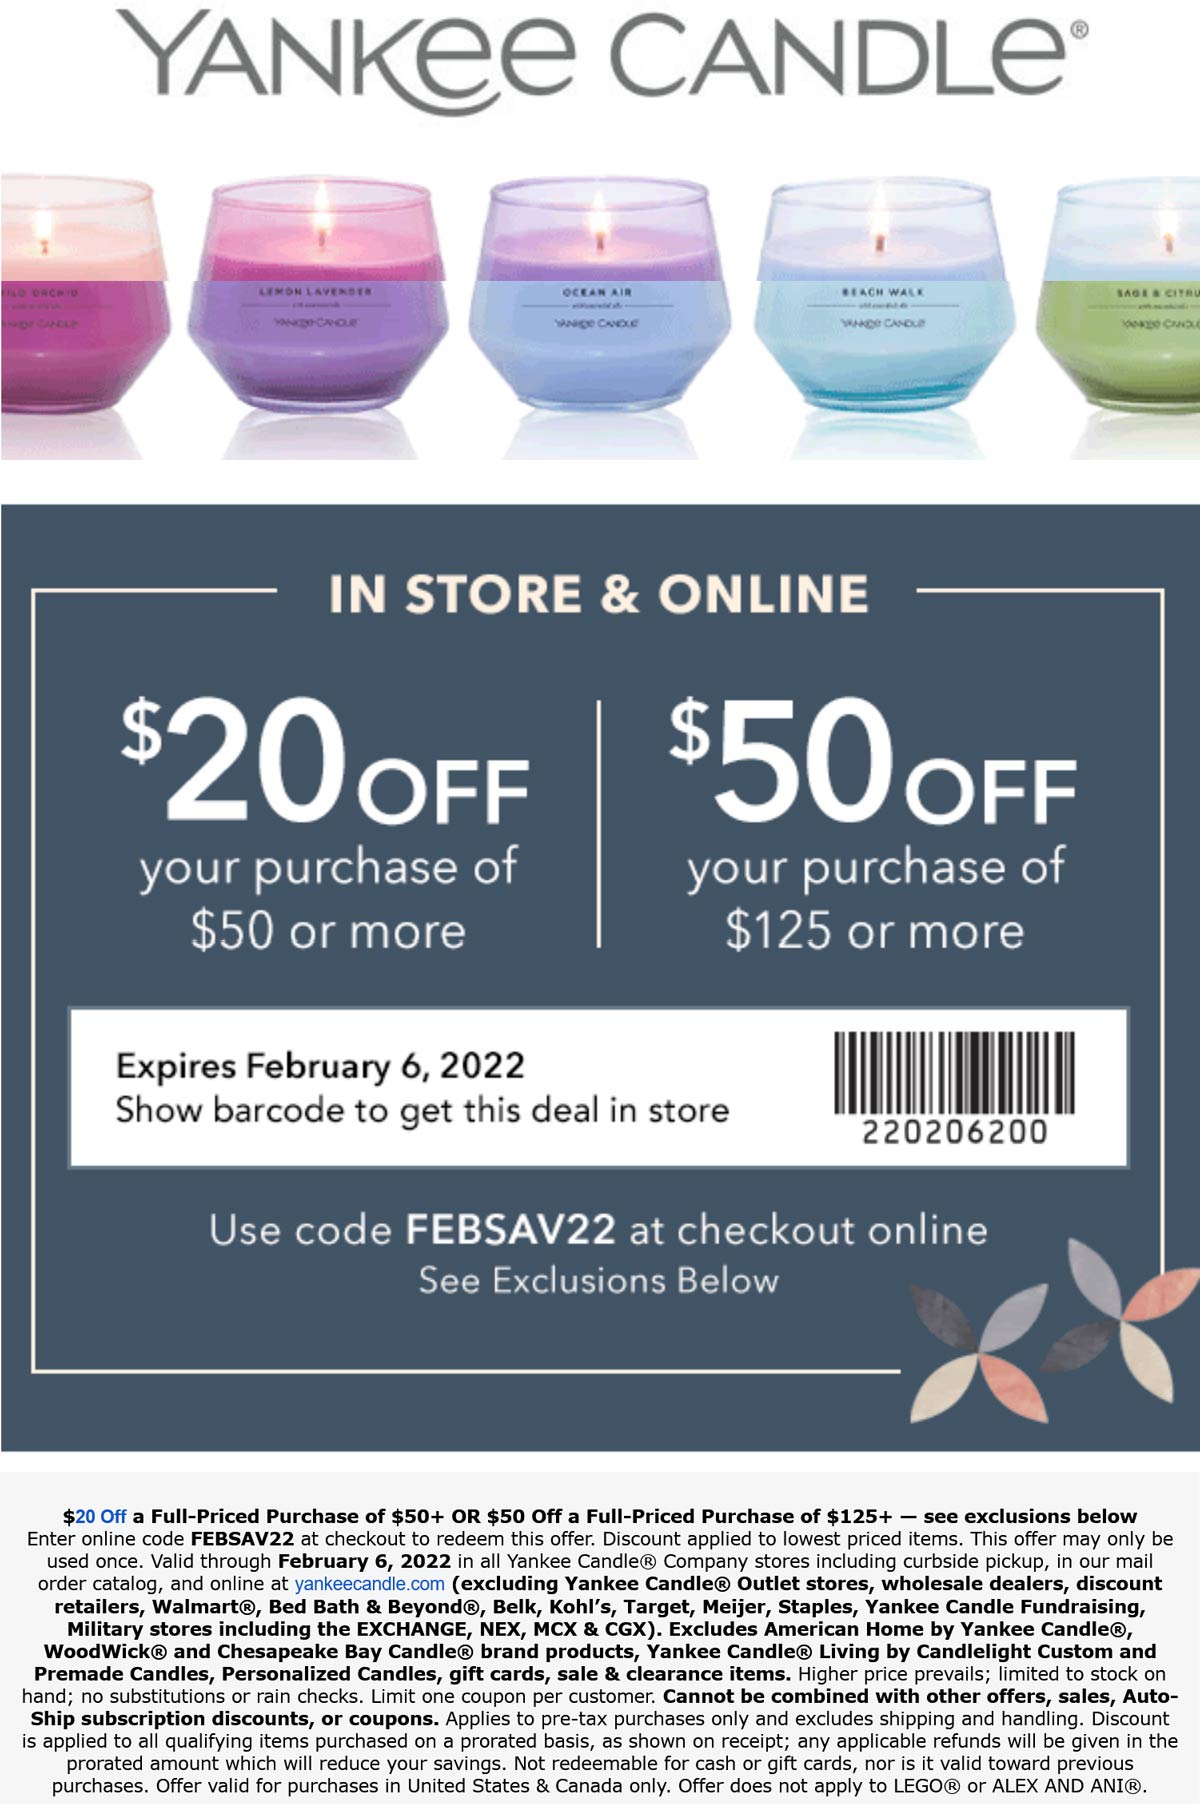 Yankee Candle stores Coupon  $20 off $50 & more at Yankee Candle, or online via promo code FEBSAV22 #yankeecandle 